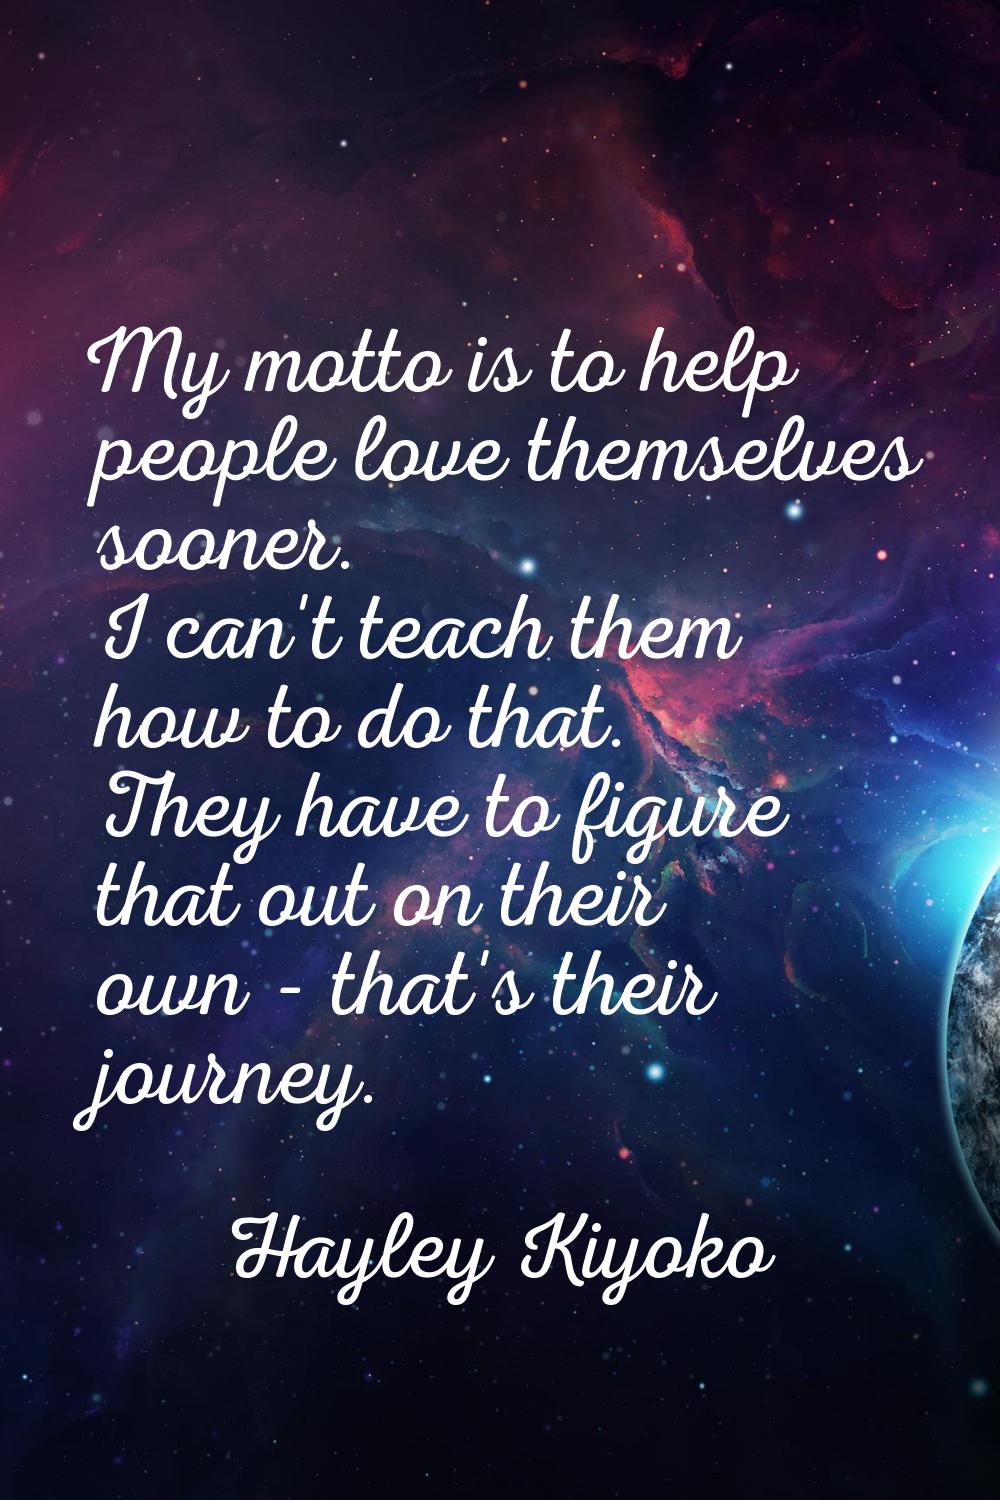 My motto is to help people love themselves sooner. I can't teach them how to do that. They have to 